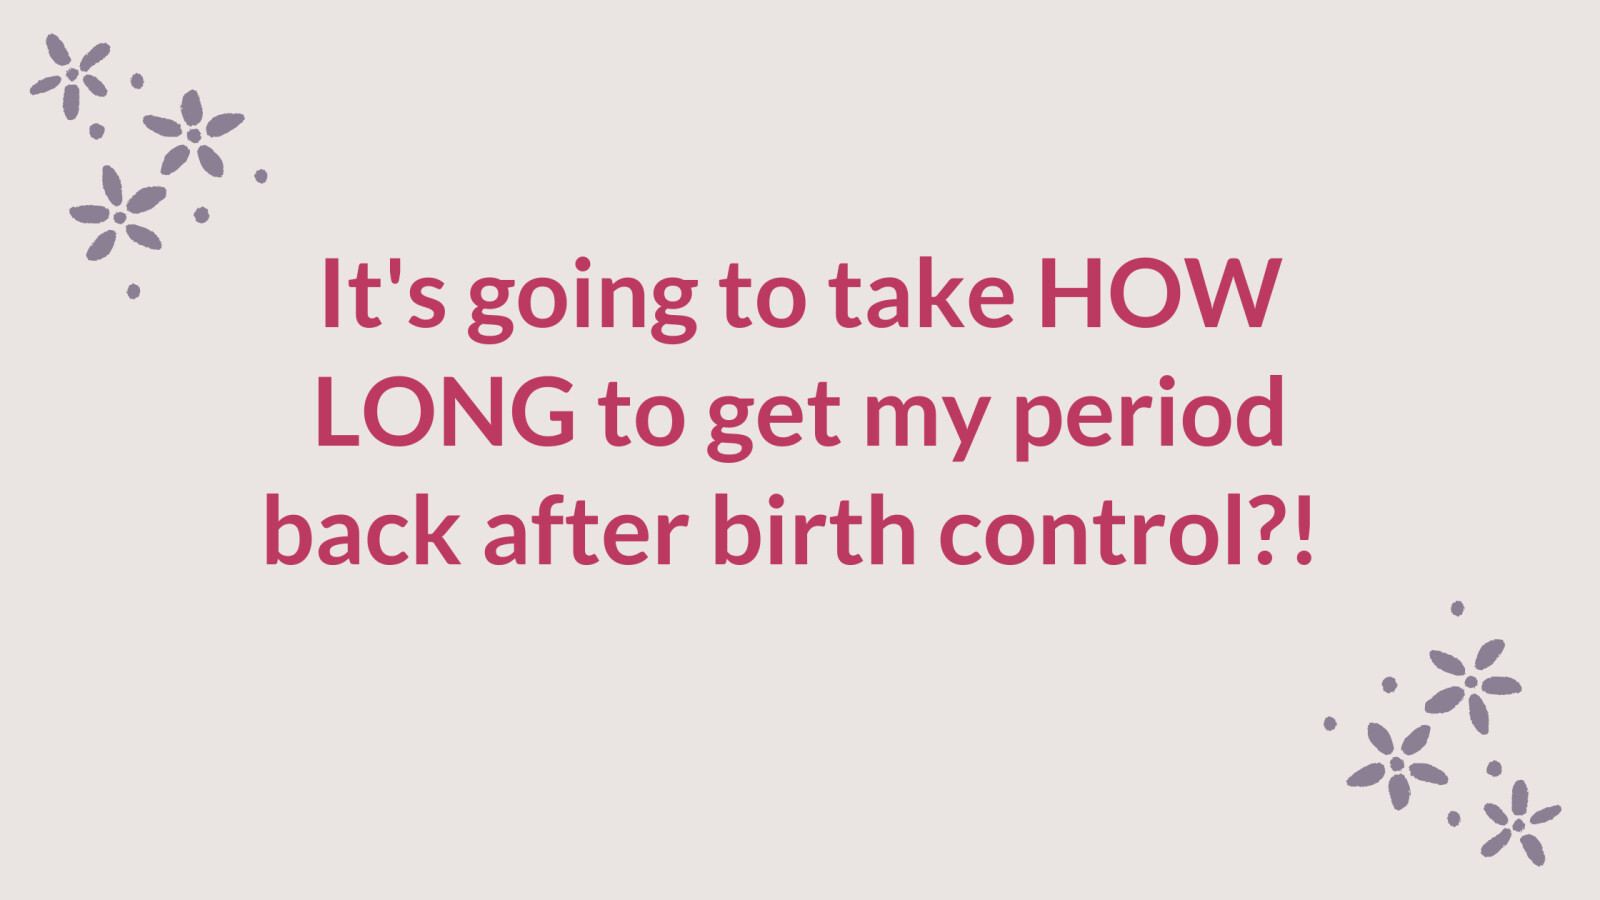 So How Long After Birth Control Will It Take To Get My Period Back? 